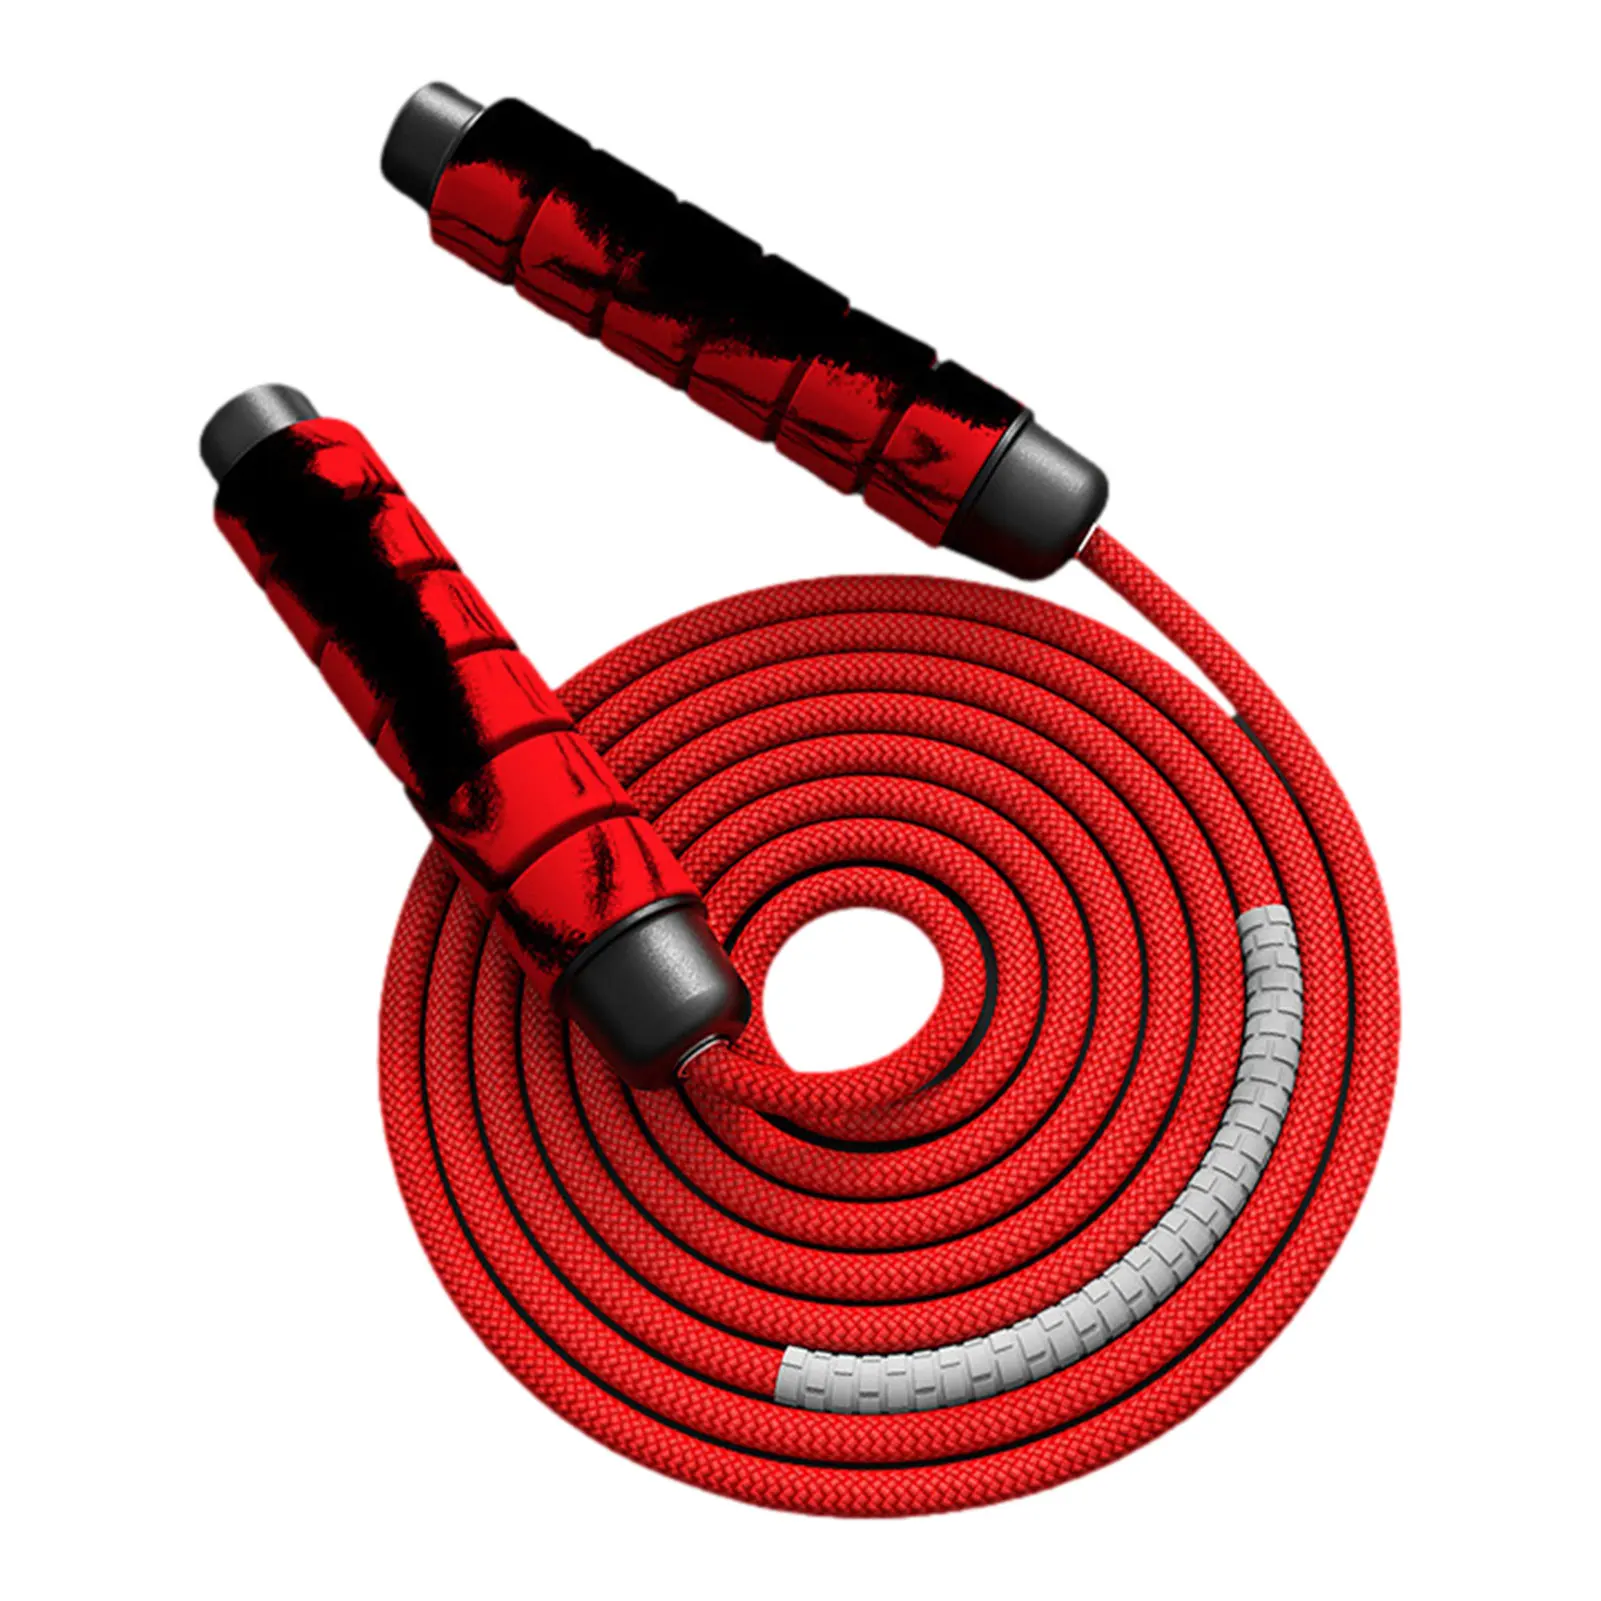 Weighted Skipping Ropes For Adults Multifun Jump Rope Exercises Equipment Home Fitness Gym Training Skipping Rope For Men Women